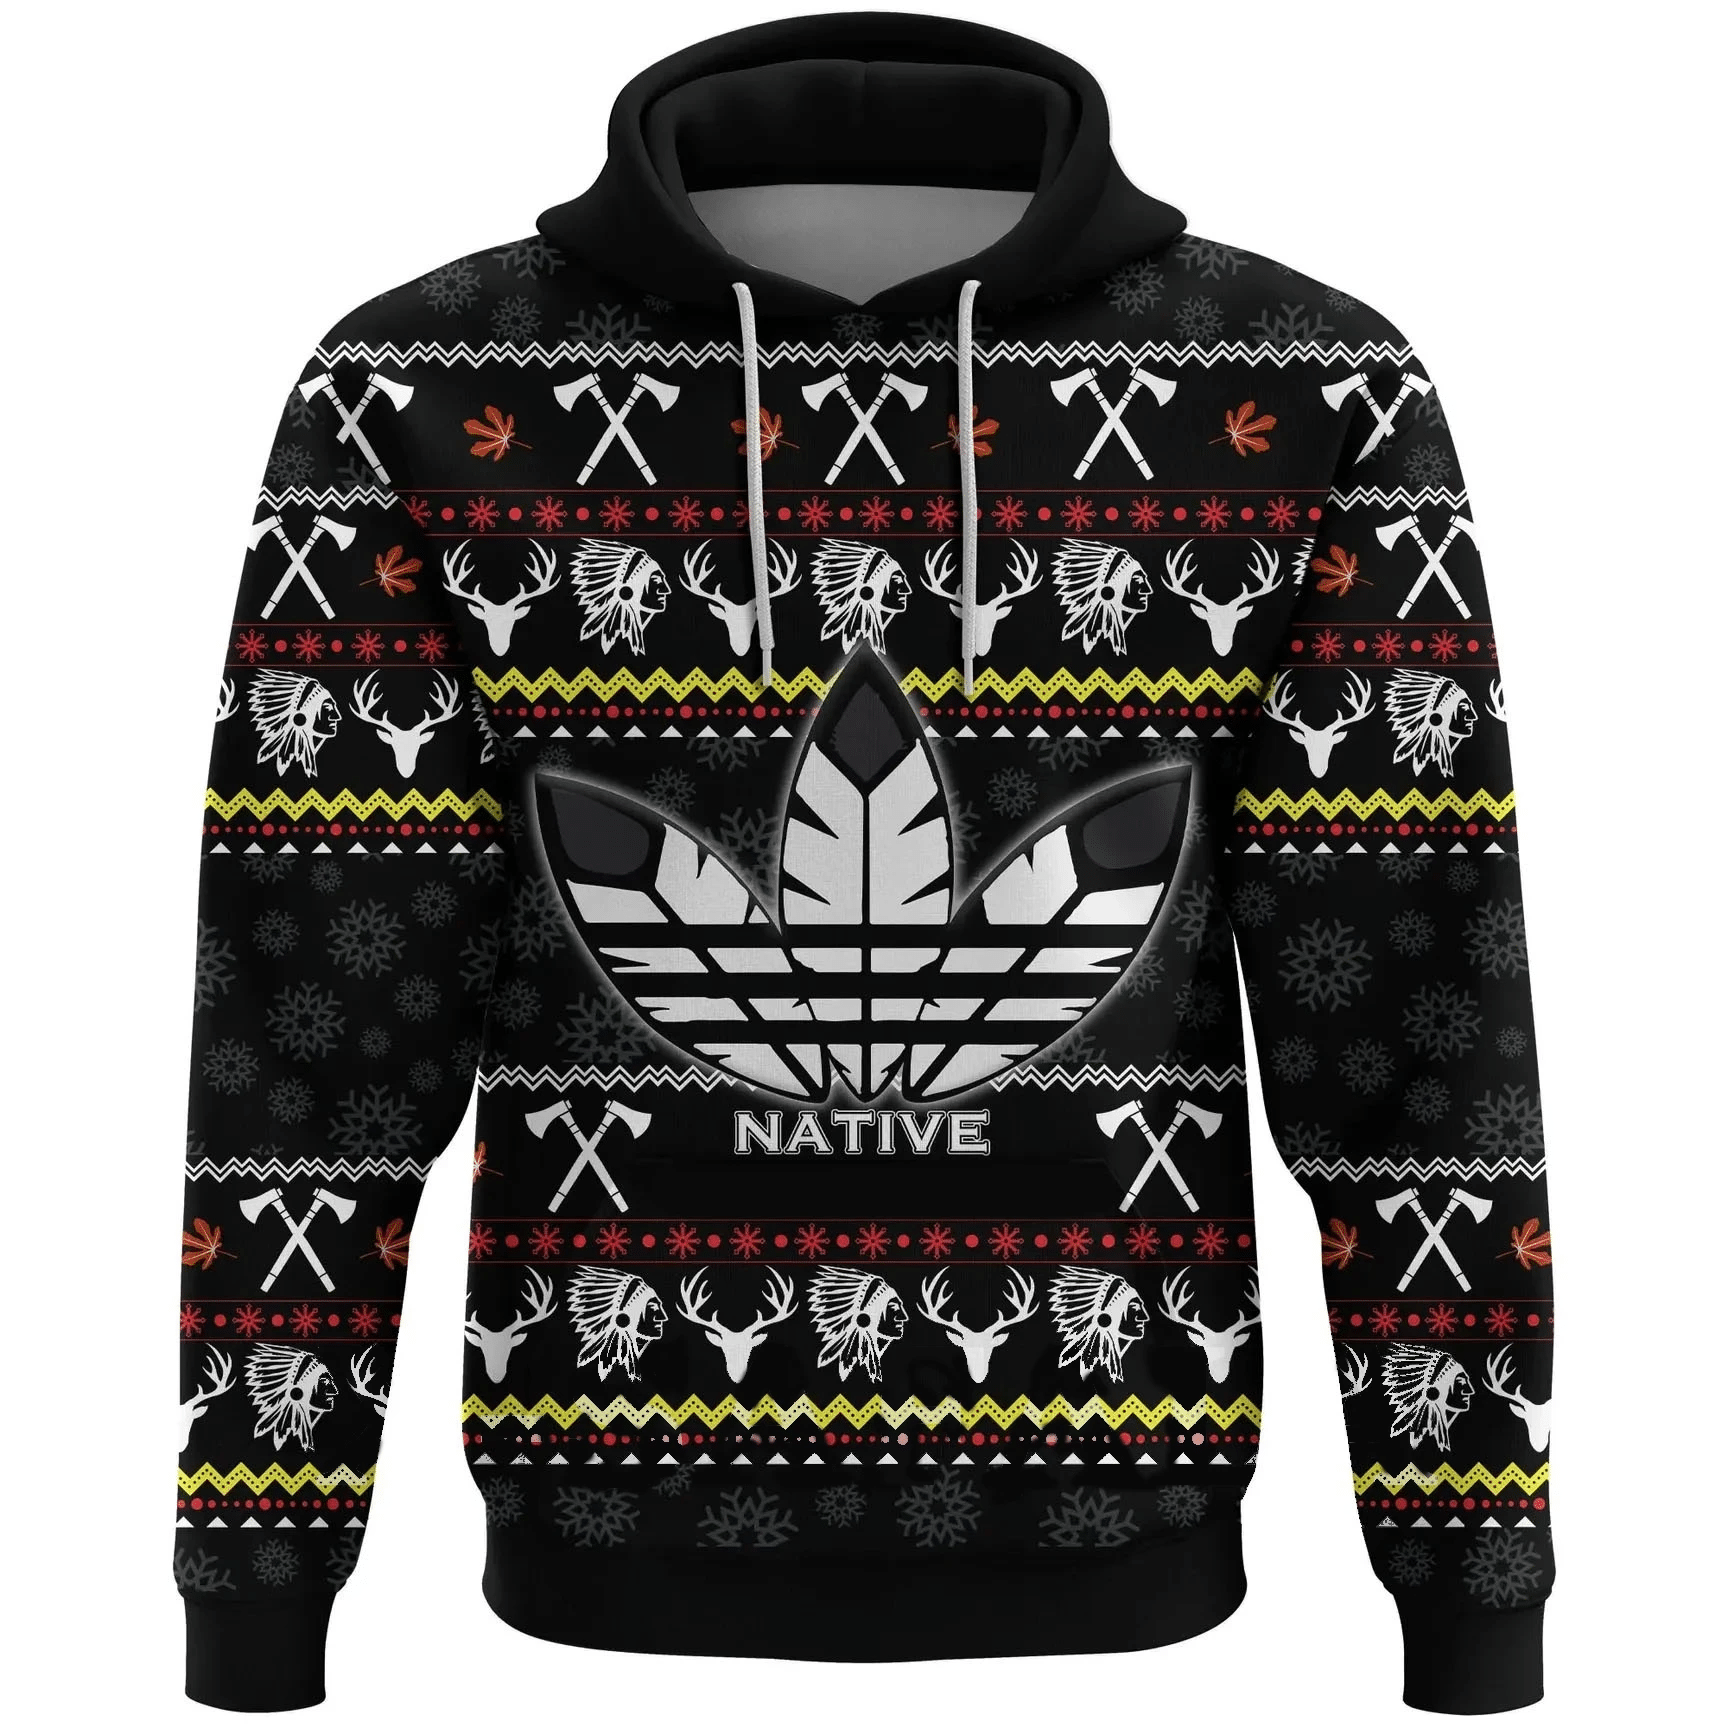 Native Sign 3D Christmas All Over Printed Shirt Style: 3D Hoodie, Color: Black